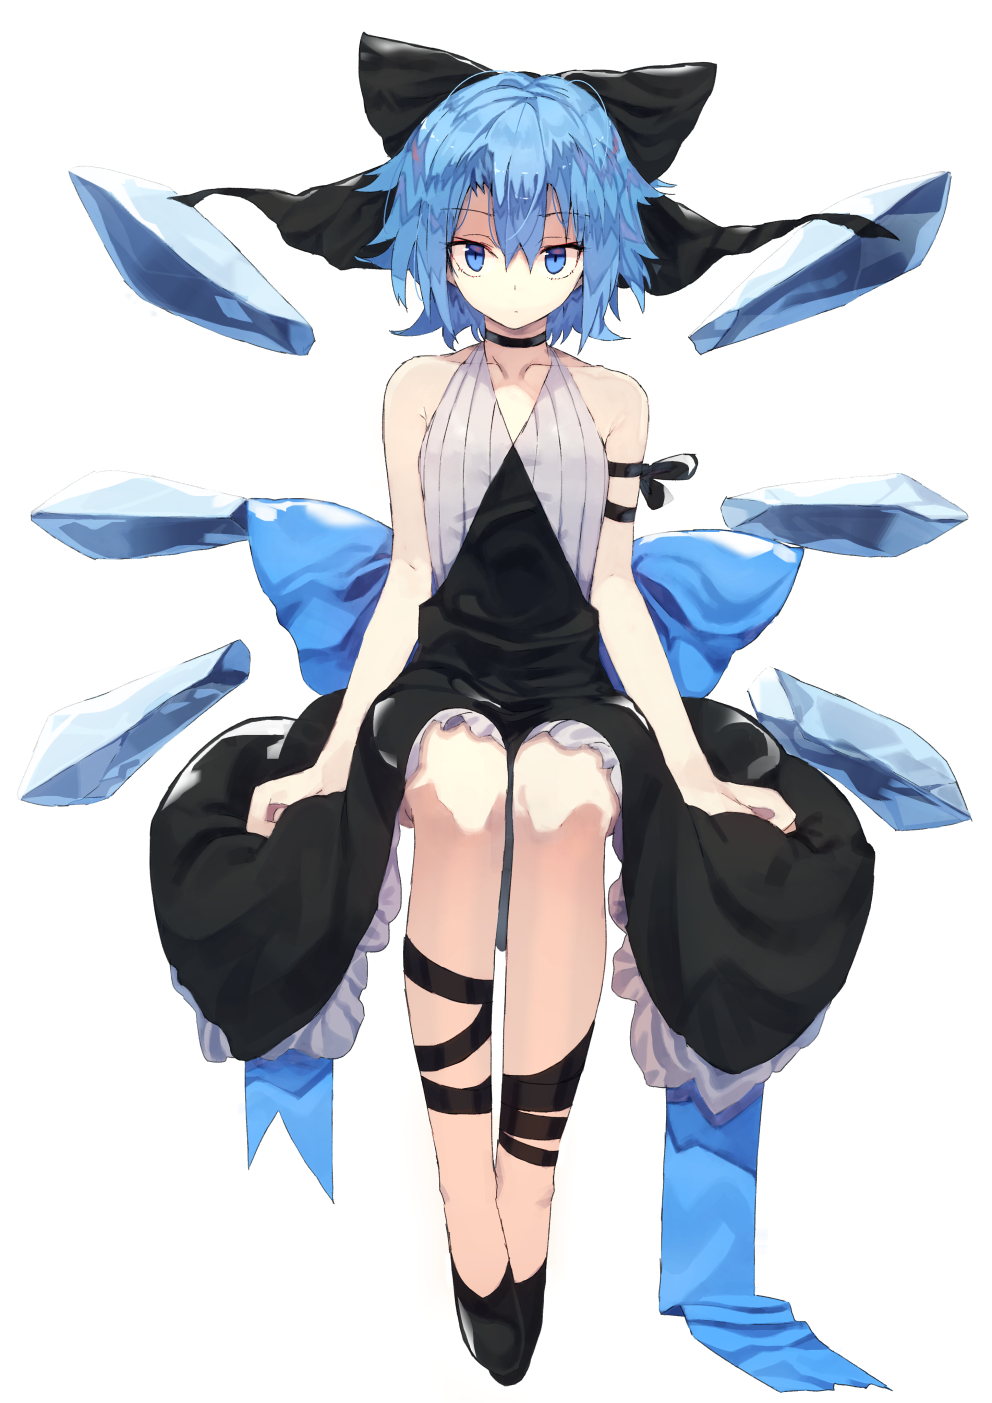 Cirnoday is a strongest day - Cirno, Touhou, Anime art, Tojo, Anime